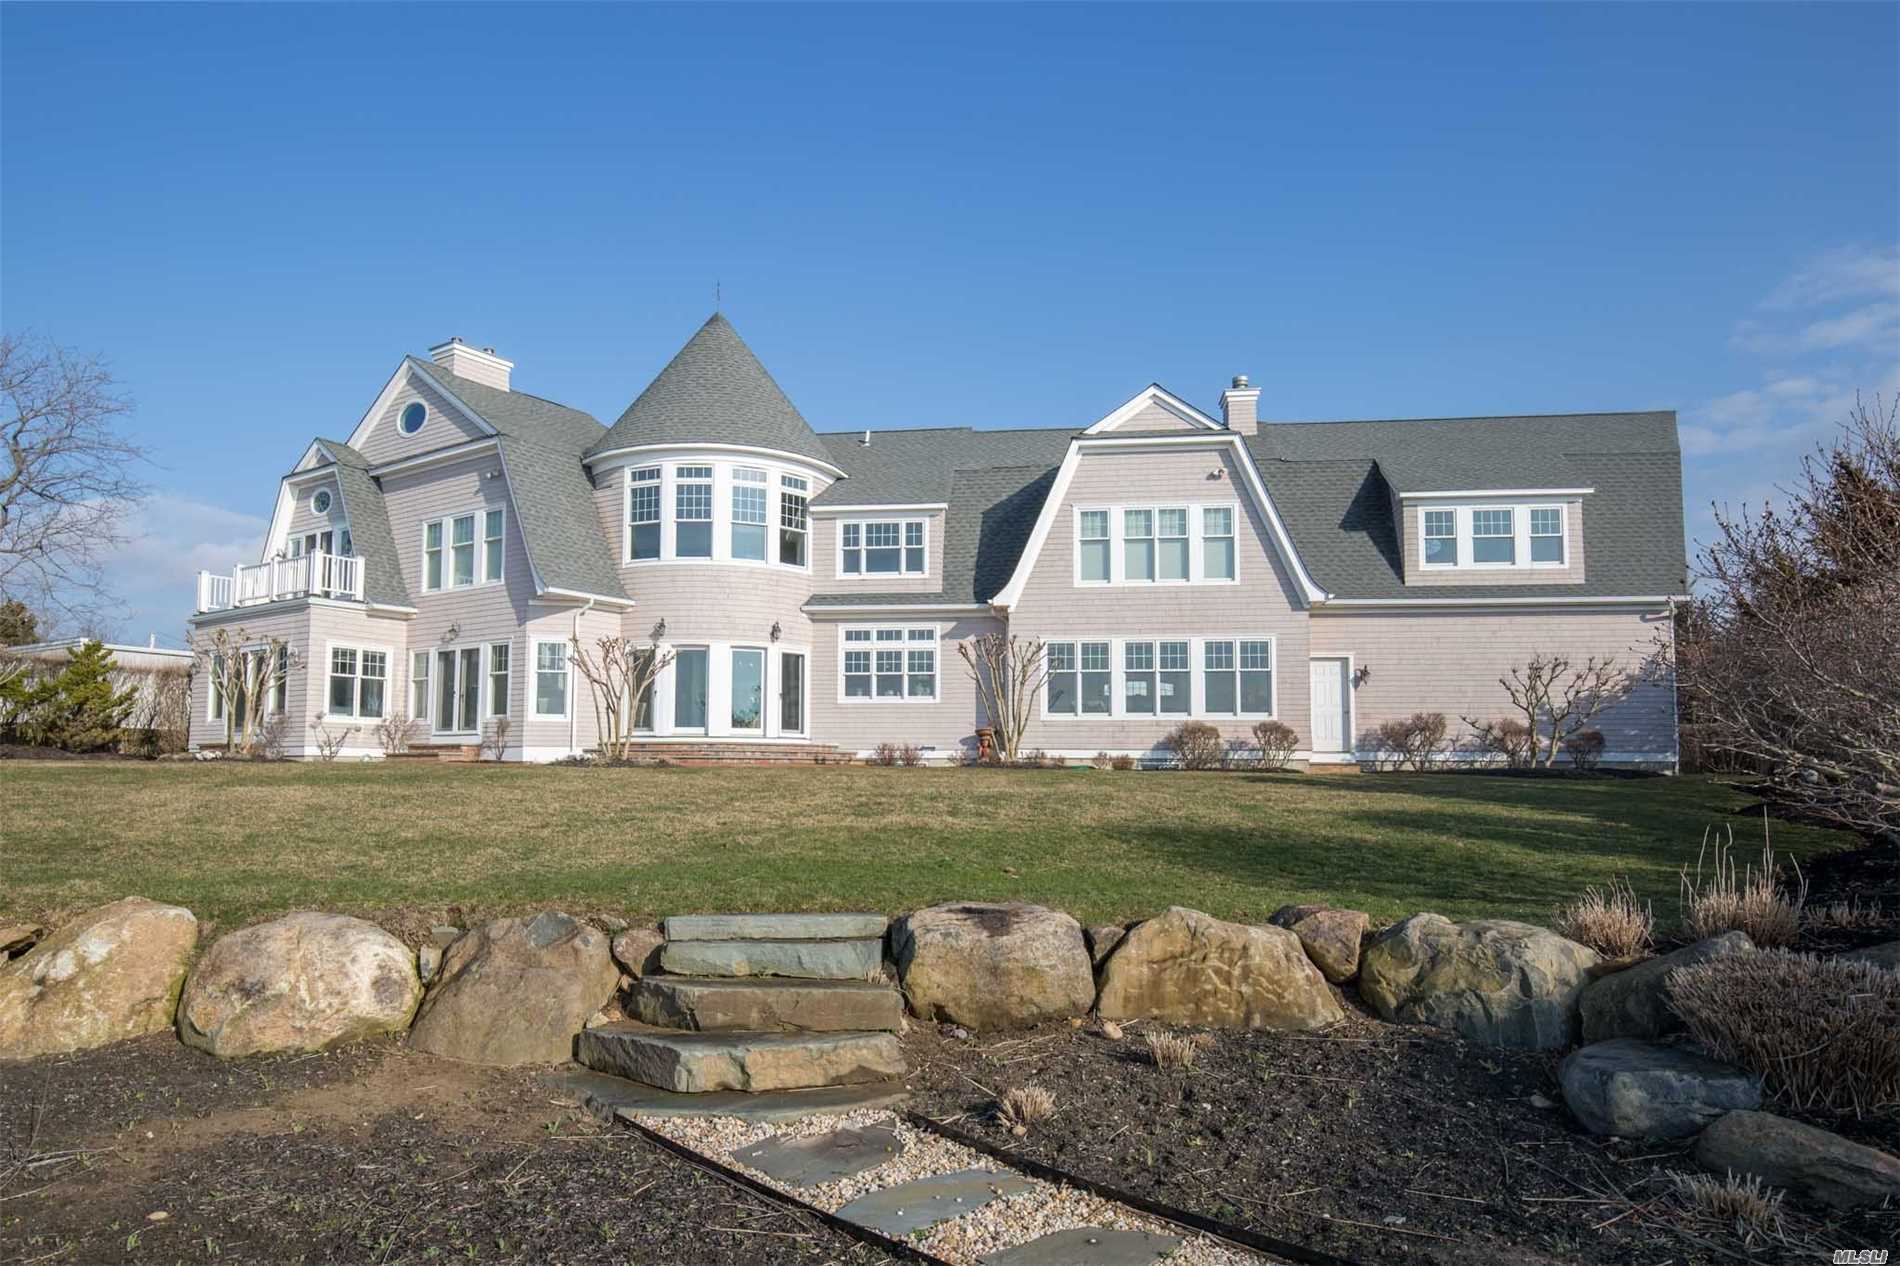 Spectacular Custom-Built Waterfront Home. Enjoy Sunsets Over The Long Island Sound And Take In Sweeping Water Views From Nearly Every Room. This 4 Bedrooms, 4 Bath Home Boasts A Chefs Kitchen, 3 Gas Burning Fireplaces, Brazilian Cherry Wood Floors, Hardwired With Surround Sound. Landscaped For Privacy And 170Ft Of Soundfrond Beach. Conveniently Located To Greenport&rsquo;s Many Restaurants And Shops.